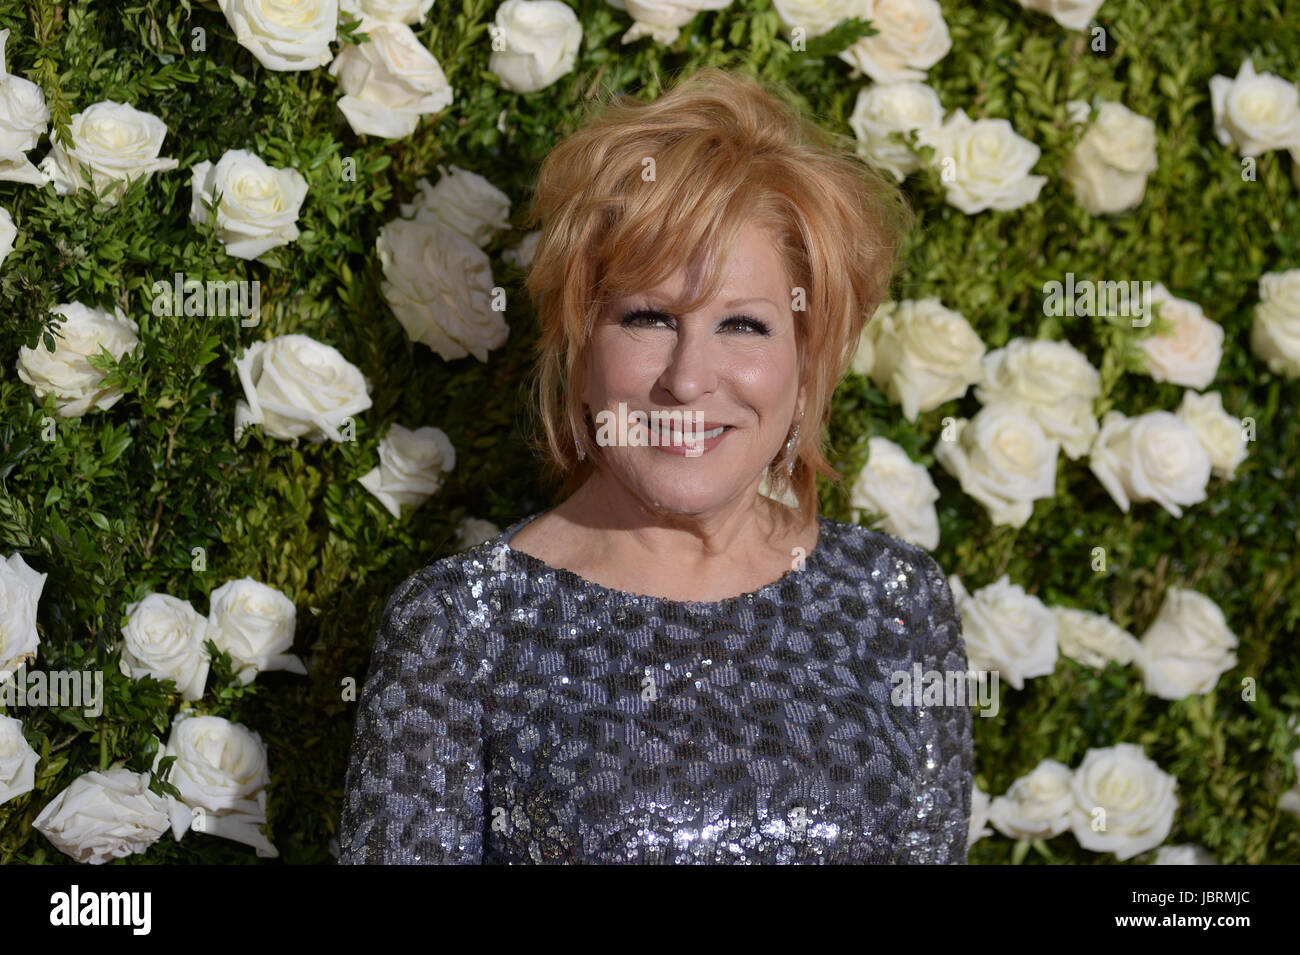 New York, USA. 11th Jun, 2017. Bette Midler attends the 2017 Tony Awards at Radio City Music Hall on June 11, 2017 in New York City. Credit: Erik Pendzich/Alamy Live News Stock Photo